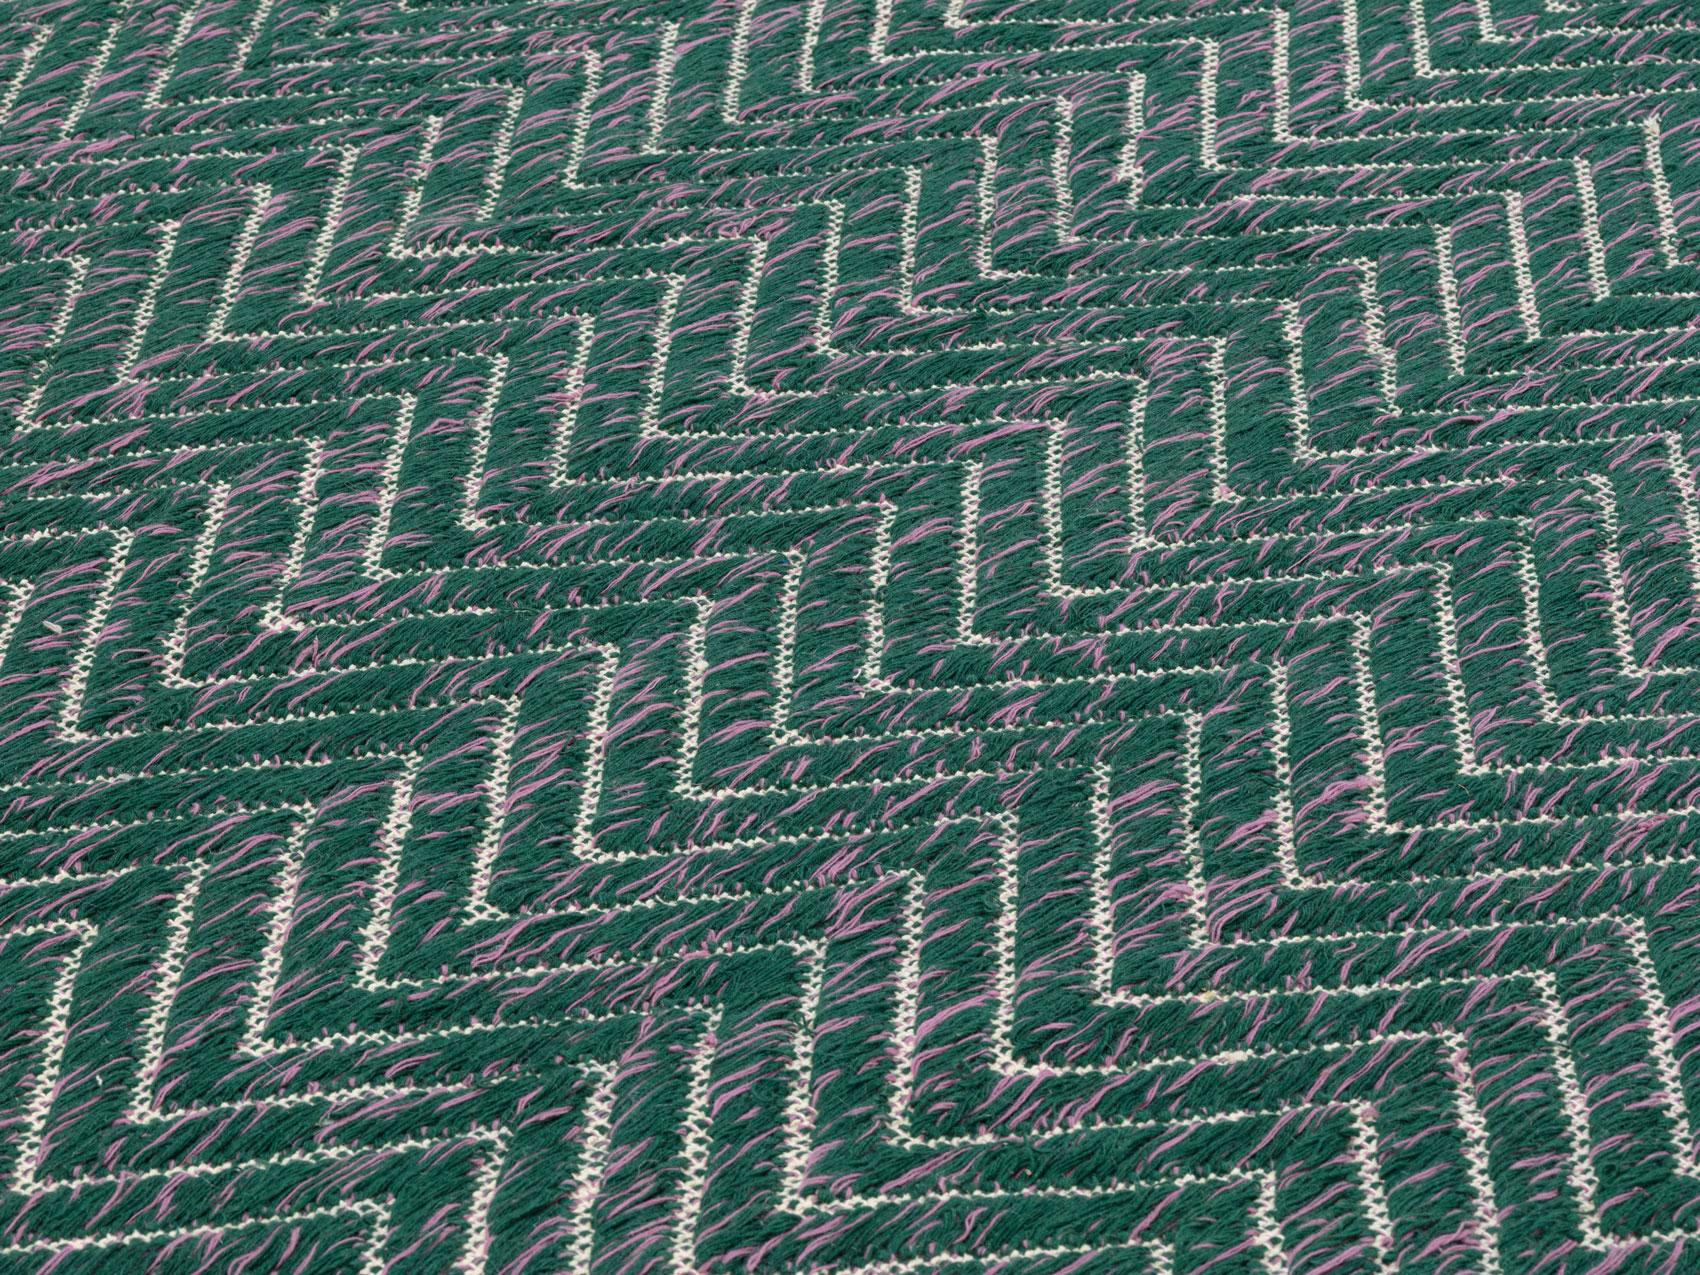 Cultivate Collection by Yuri Himuro. This rug’s idea is from my SNIP SNAP collections. SNIP SNAP is a jacquard weaving textile that allows you to snip and snap with scissors to arrange its design. I develop my own weaving mechanism that leads me to